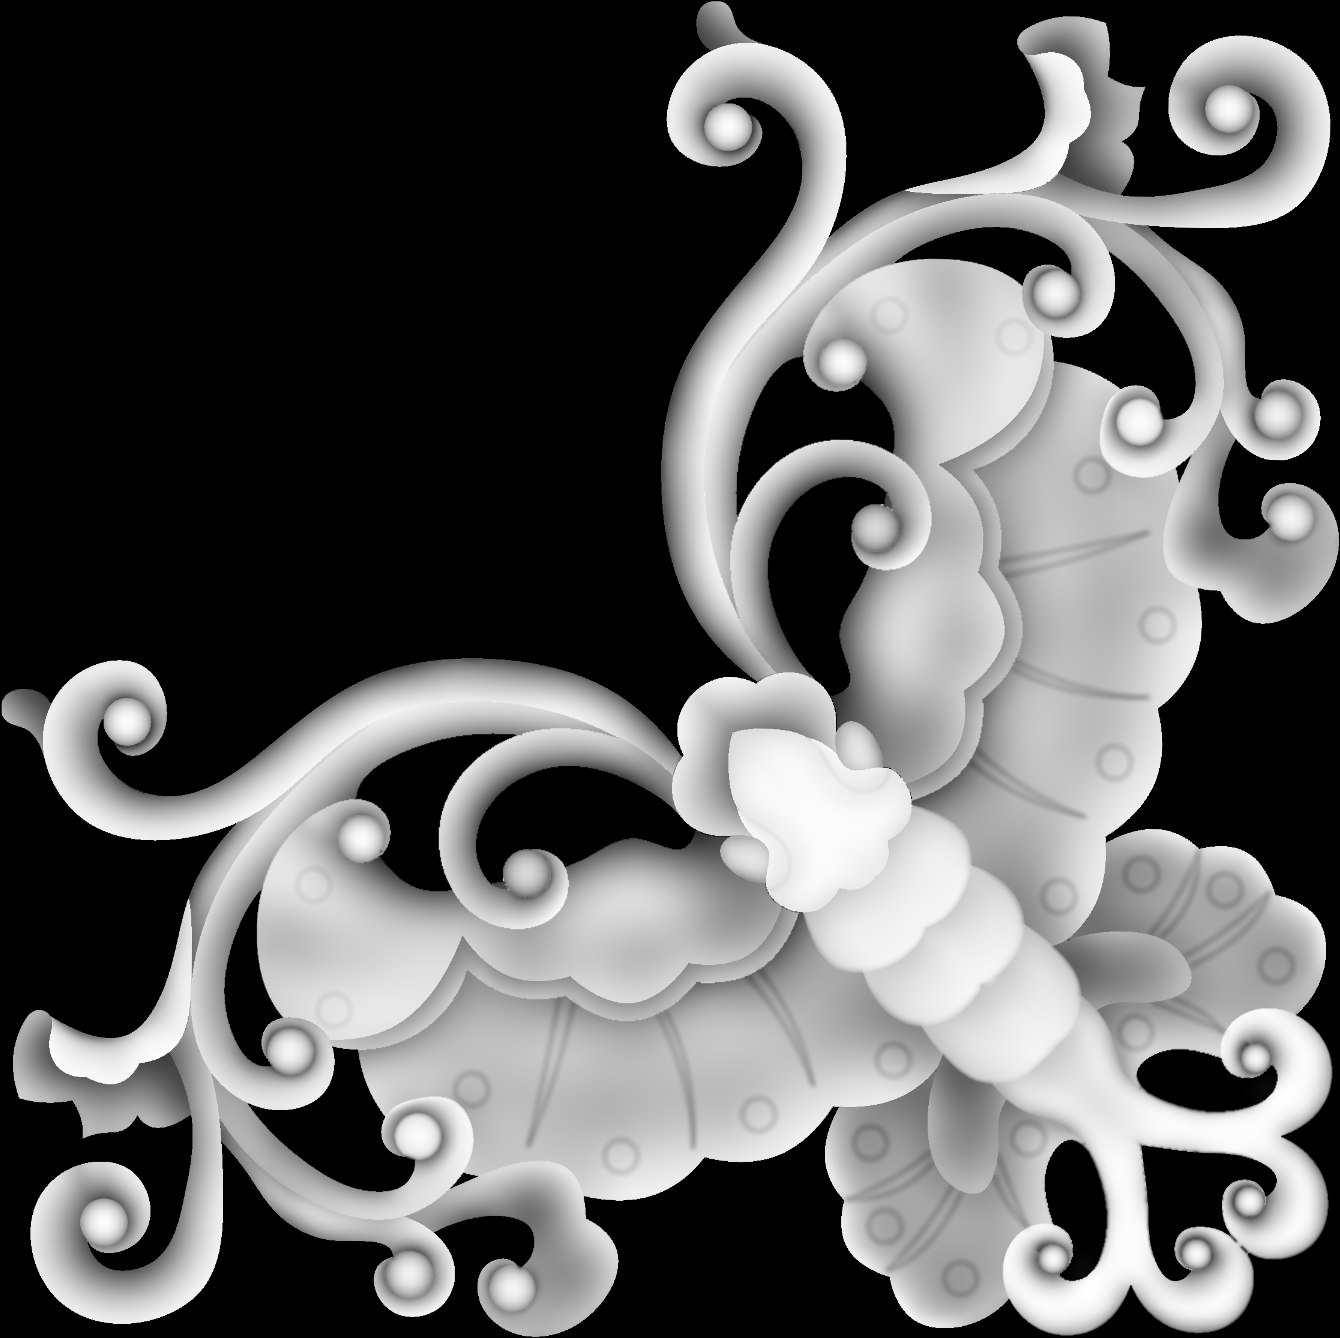 Butterfly Grayscale Decorative Design BMP File